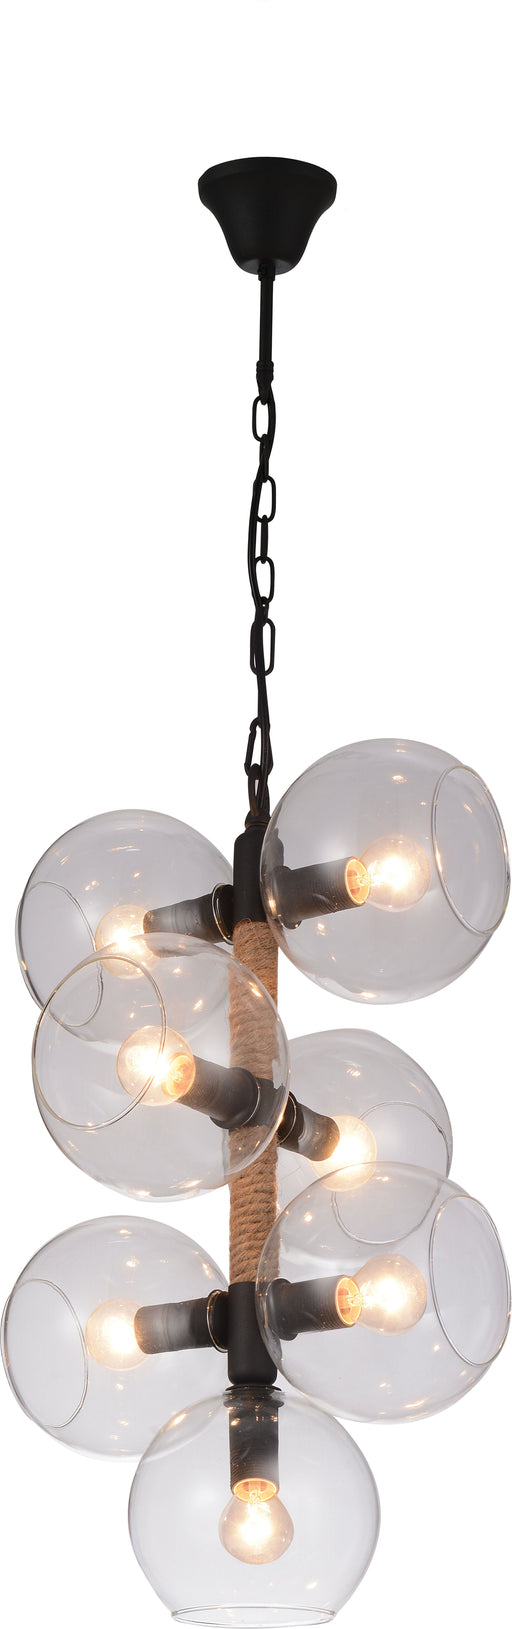 Okee - Ceiling Lamp - Black Satin & Amber Glass Unique Piece Furniture